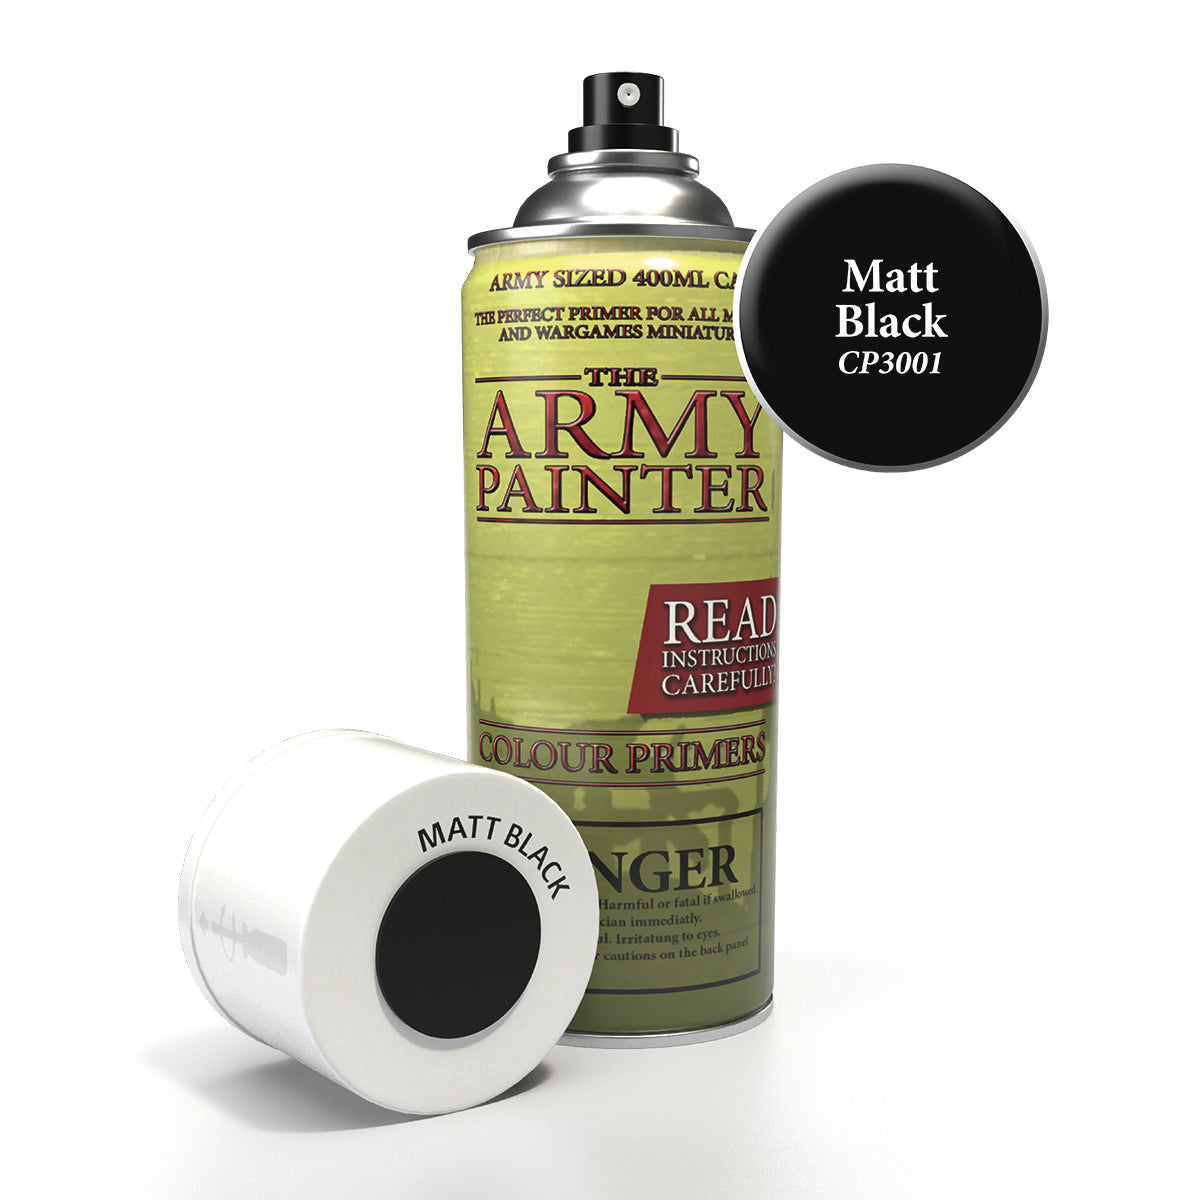 Army Painter Colour Primer Matt Black Spray - COURIER SHIPPING ONLY